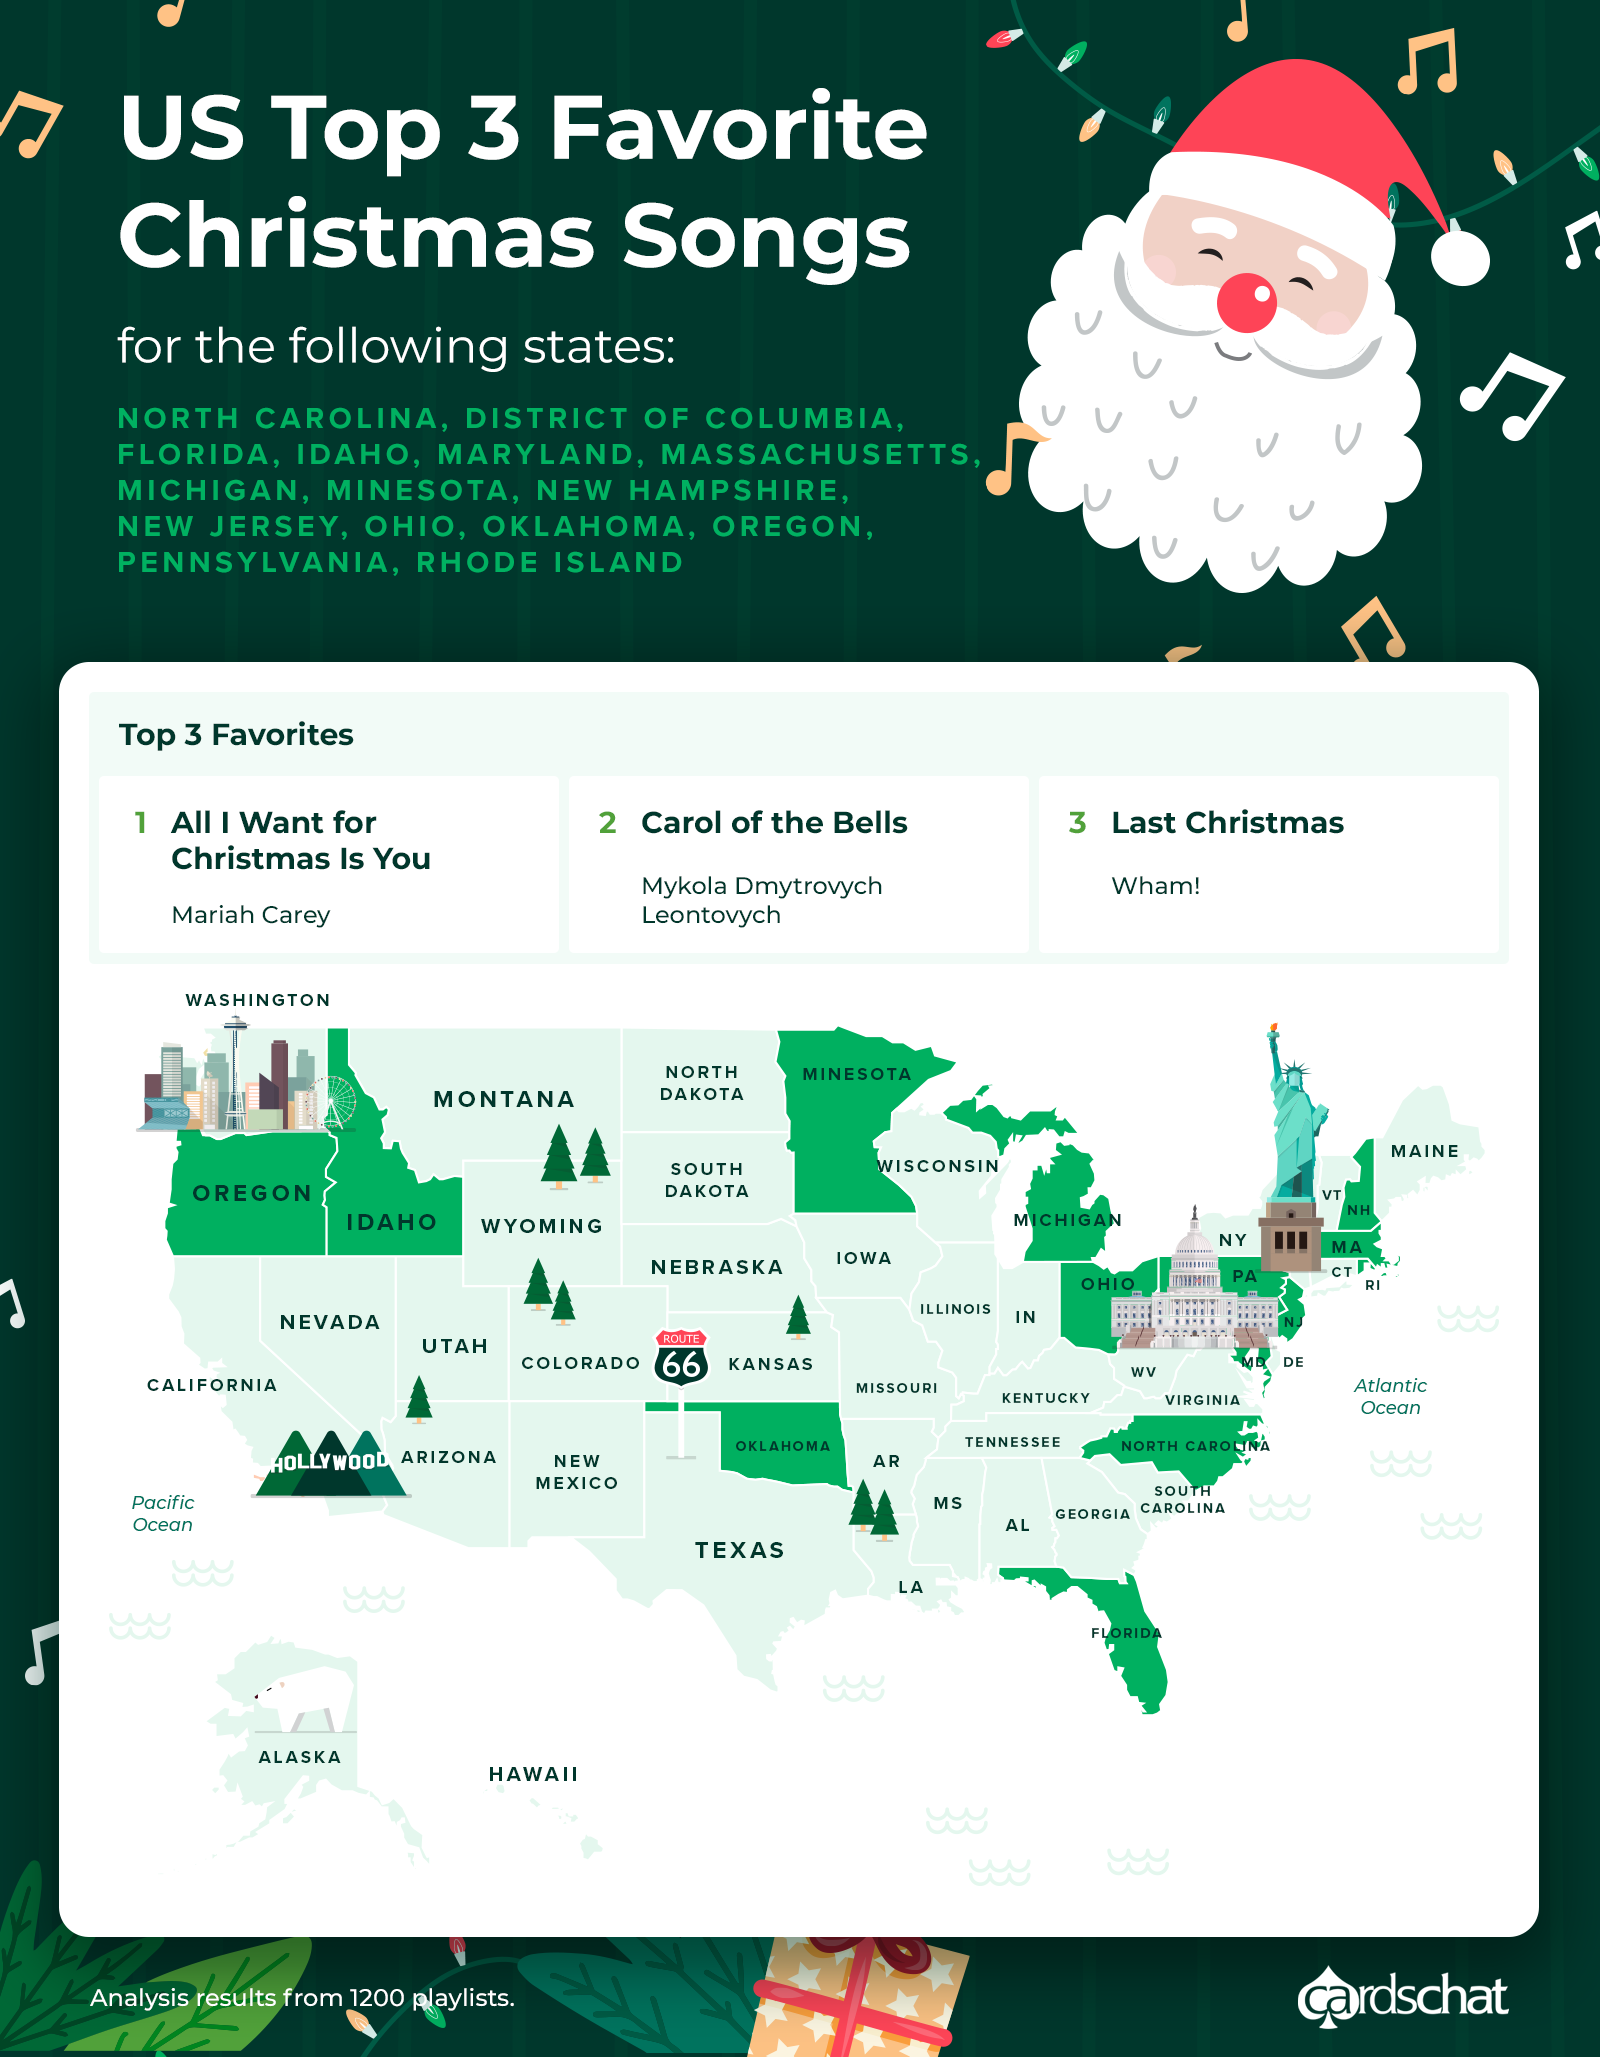 Most popular Christmas song in your state